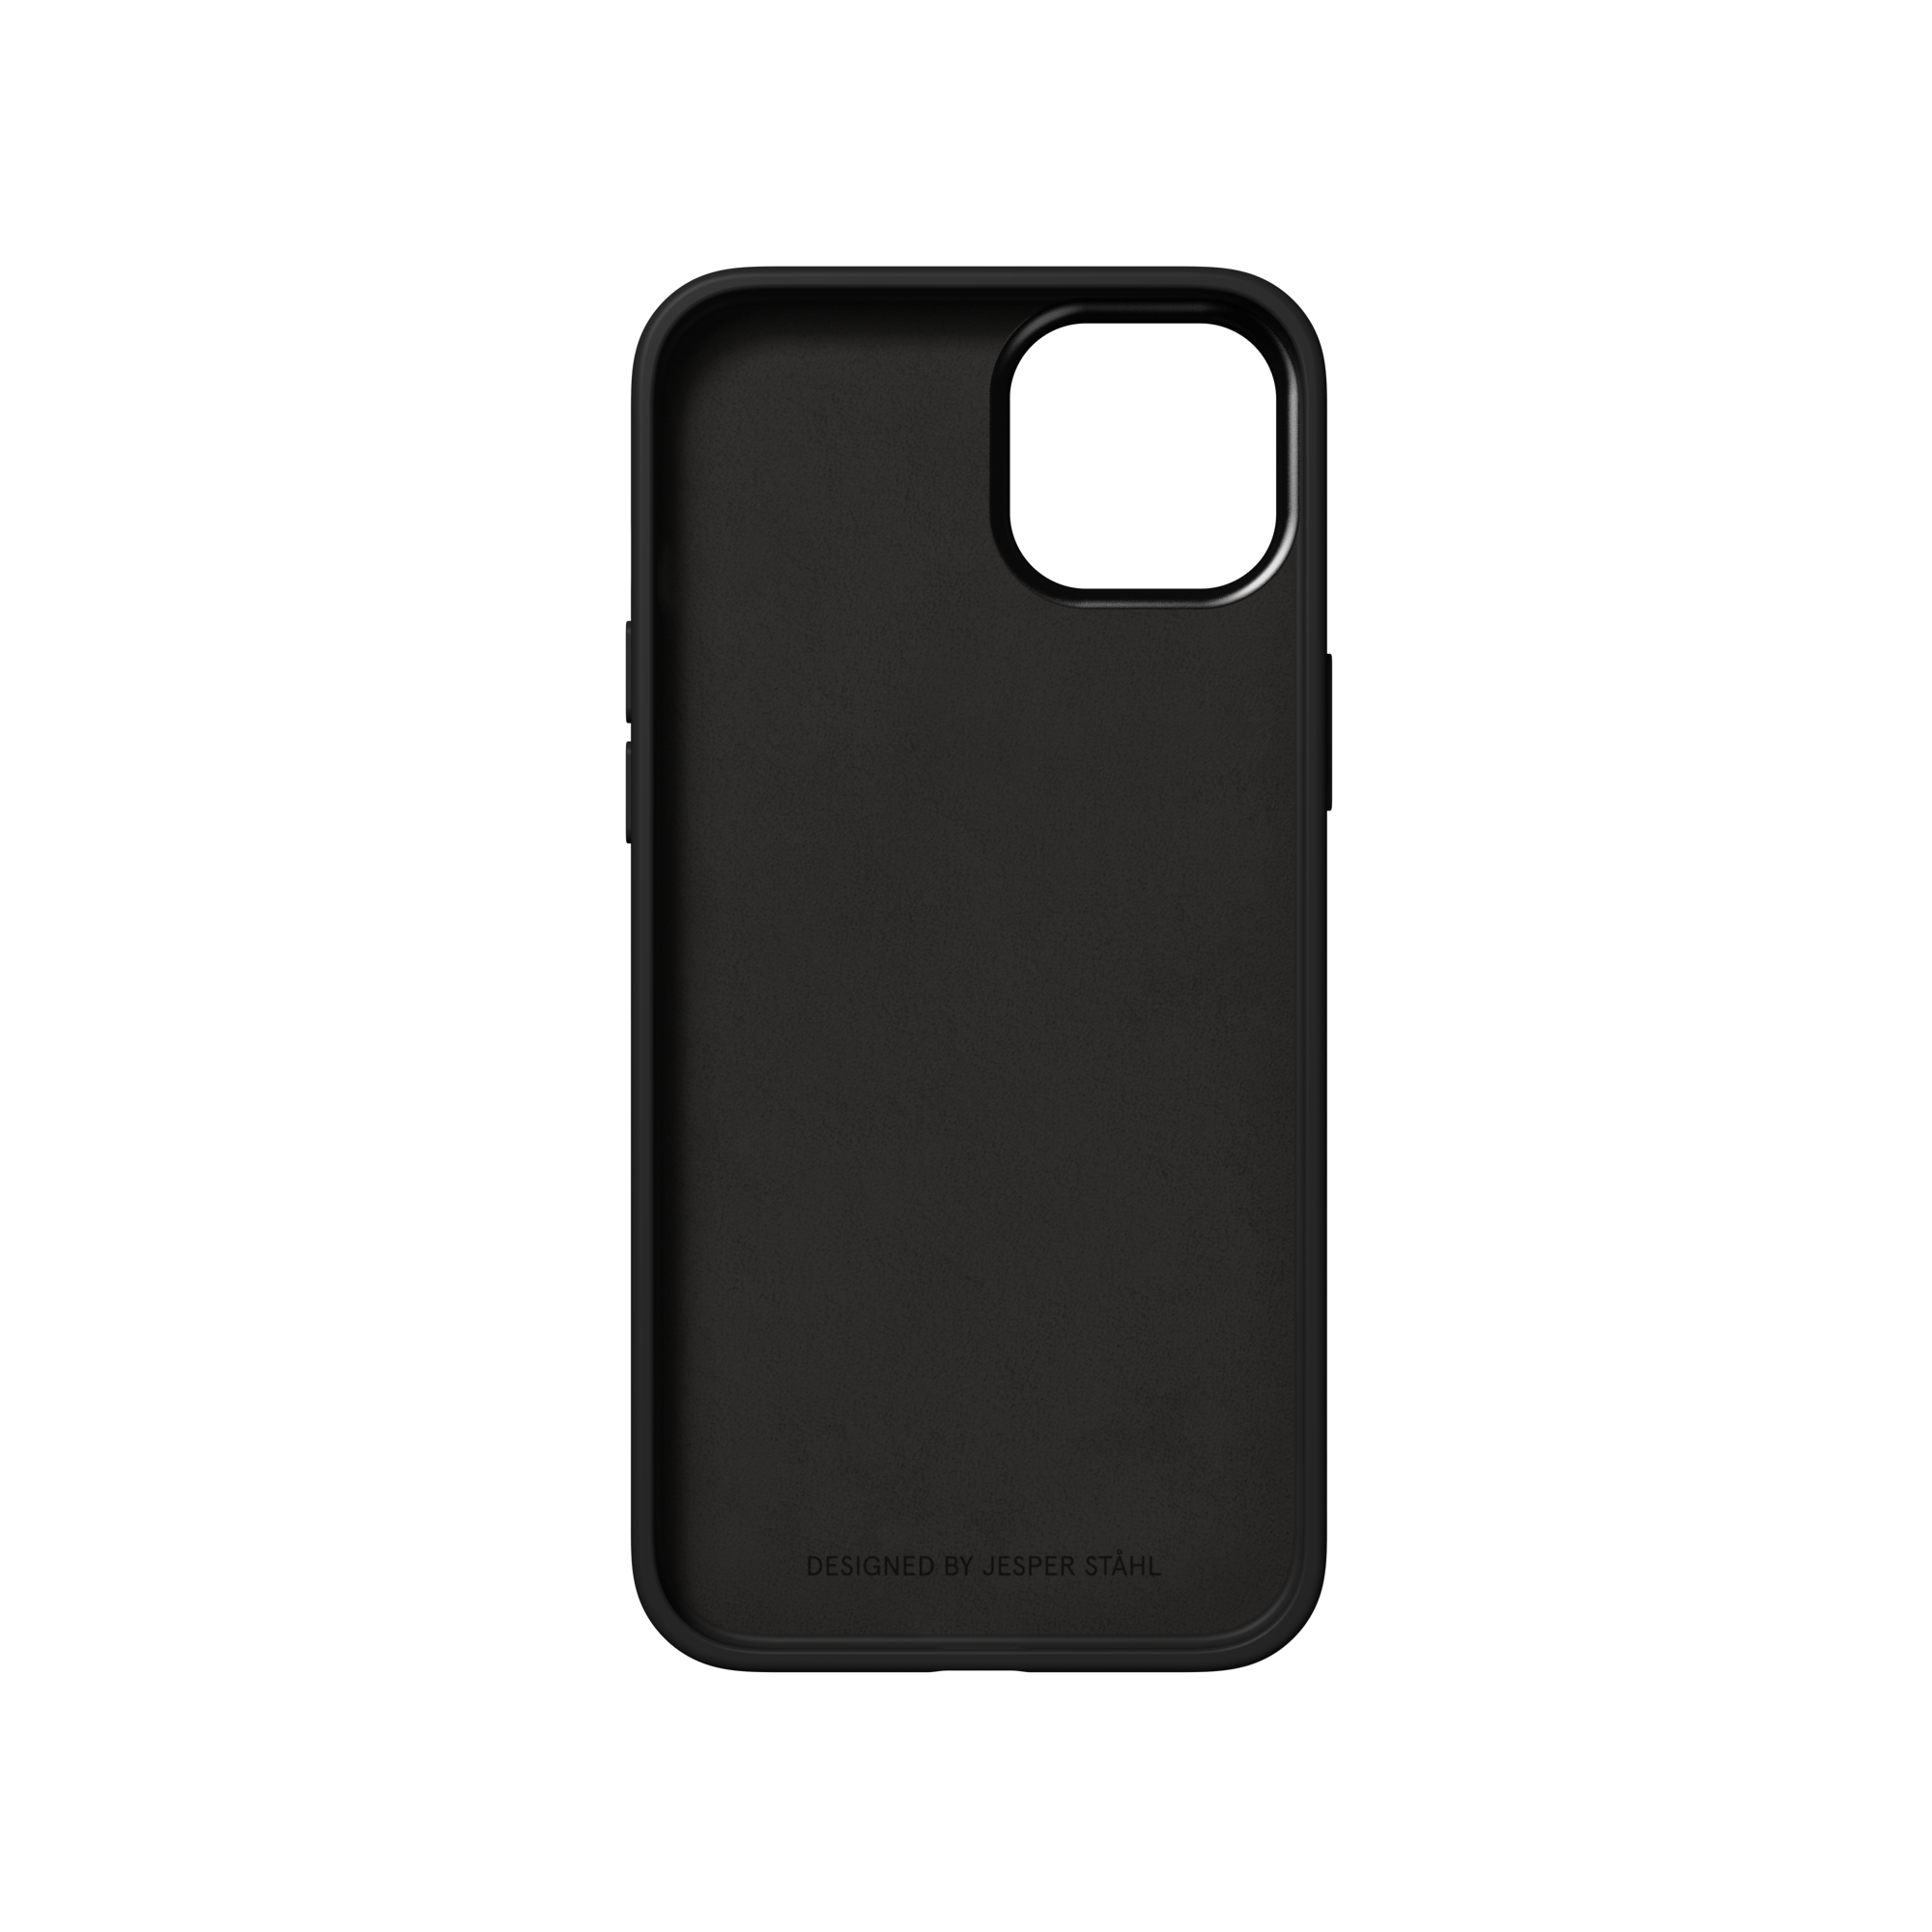 Bold, PRO Backcover, BLACK IPHONE MAX, NUDIENT 15 APPLE,